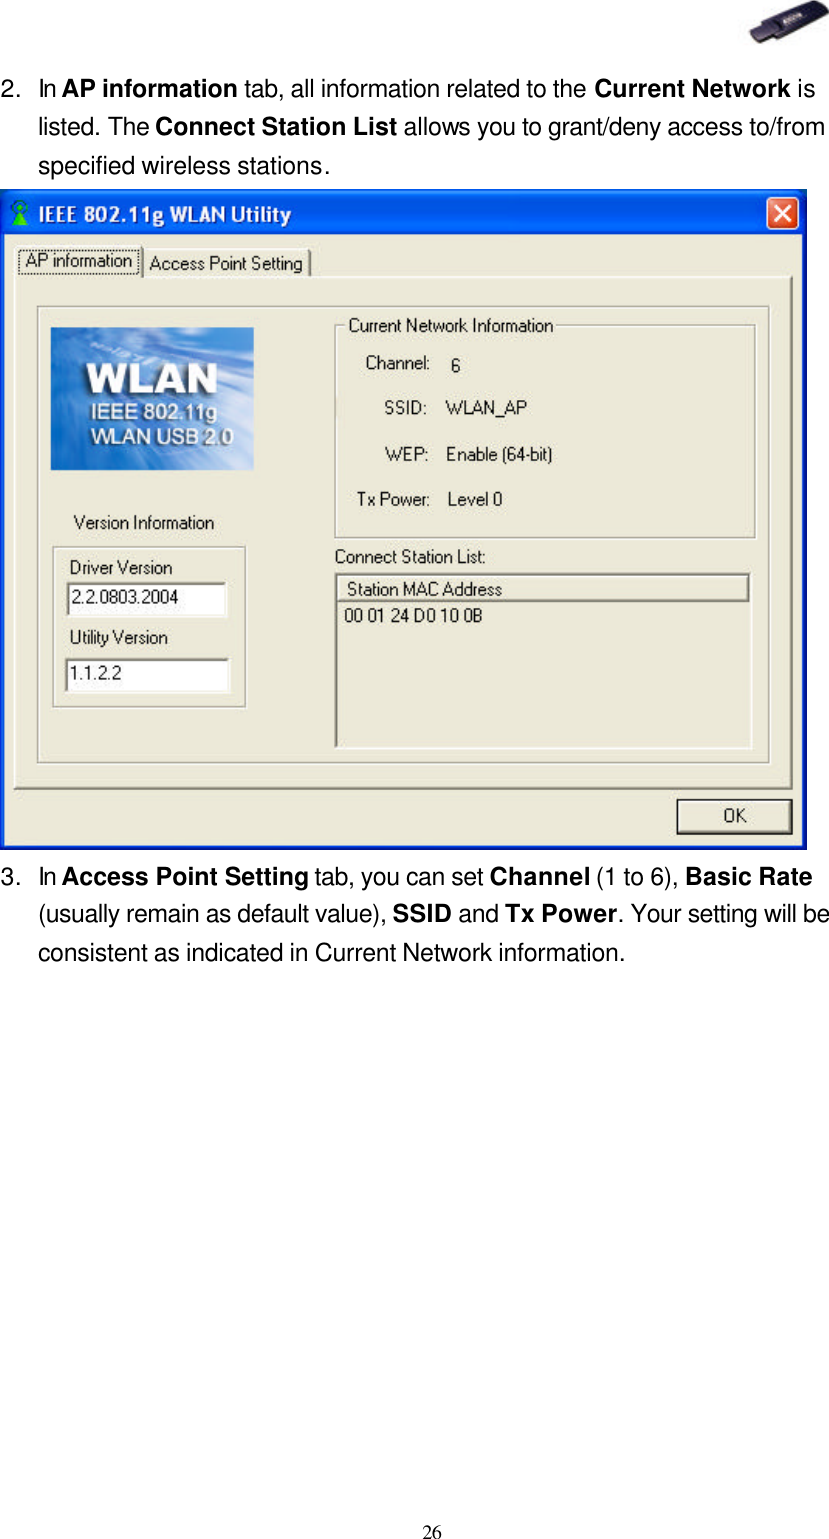   26 2. In AP information tab, all information related to the Current Network is listed. The Connect Station List allows you to grant/deny access to/from specified wireless stations.  3. In Access Point Setting tab, you can set Channel (1 to 6), Basic Rate (usually remain as default value), SSID and Tx Power. Your setting will be consistent as indicated in Current Network information. 